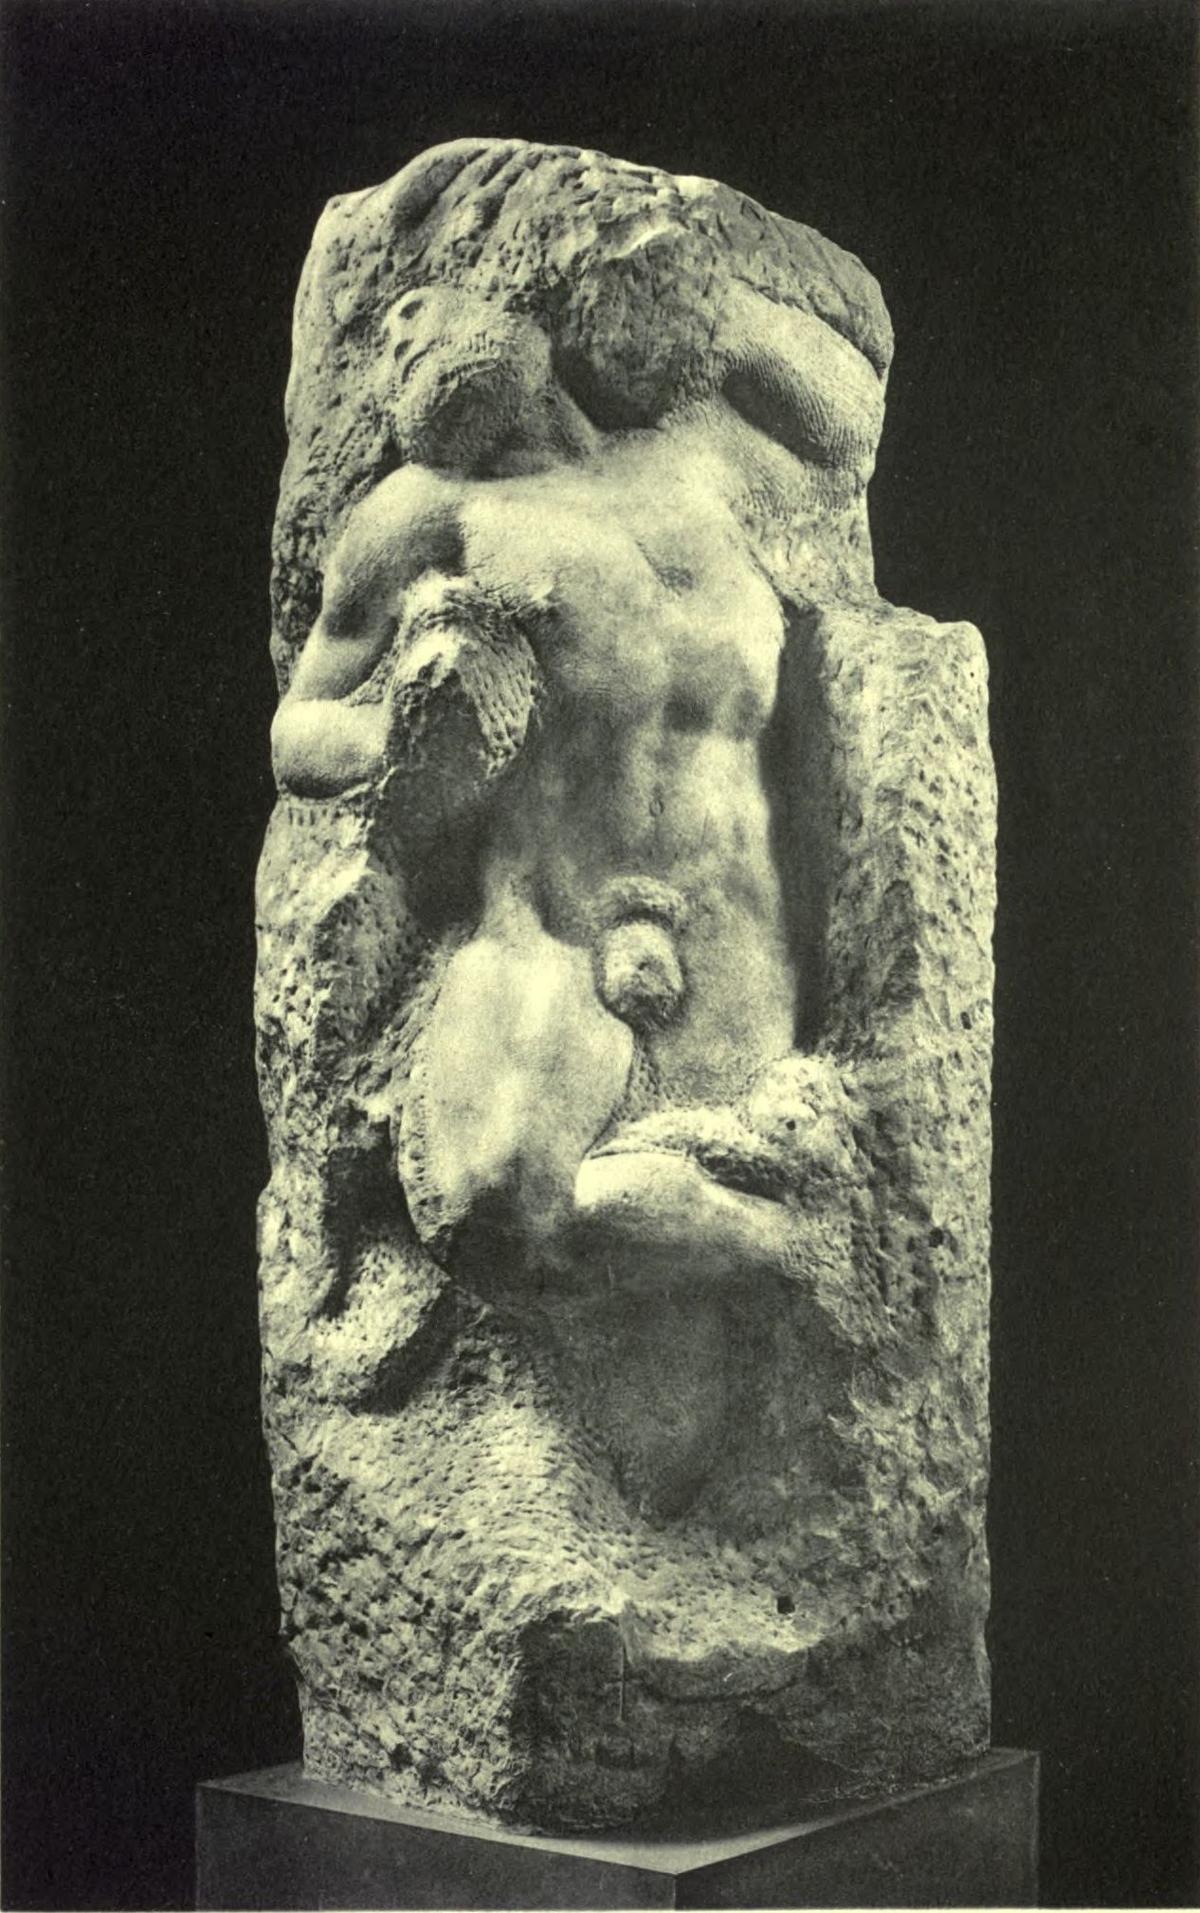 UNFINISHED FIGURE (After Michelagnolo. Florence: Museo Nazionale) Brogi